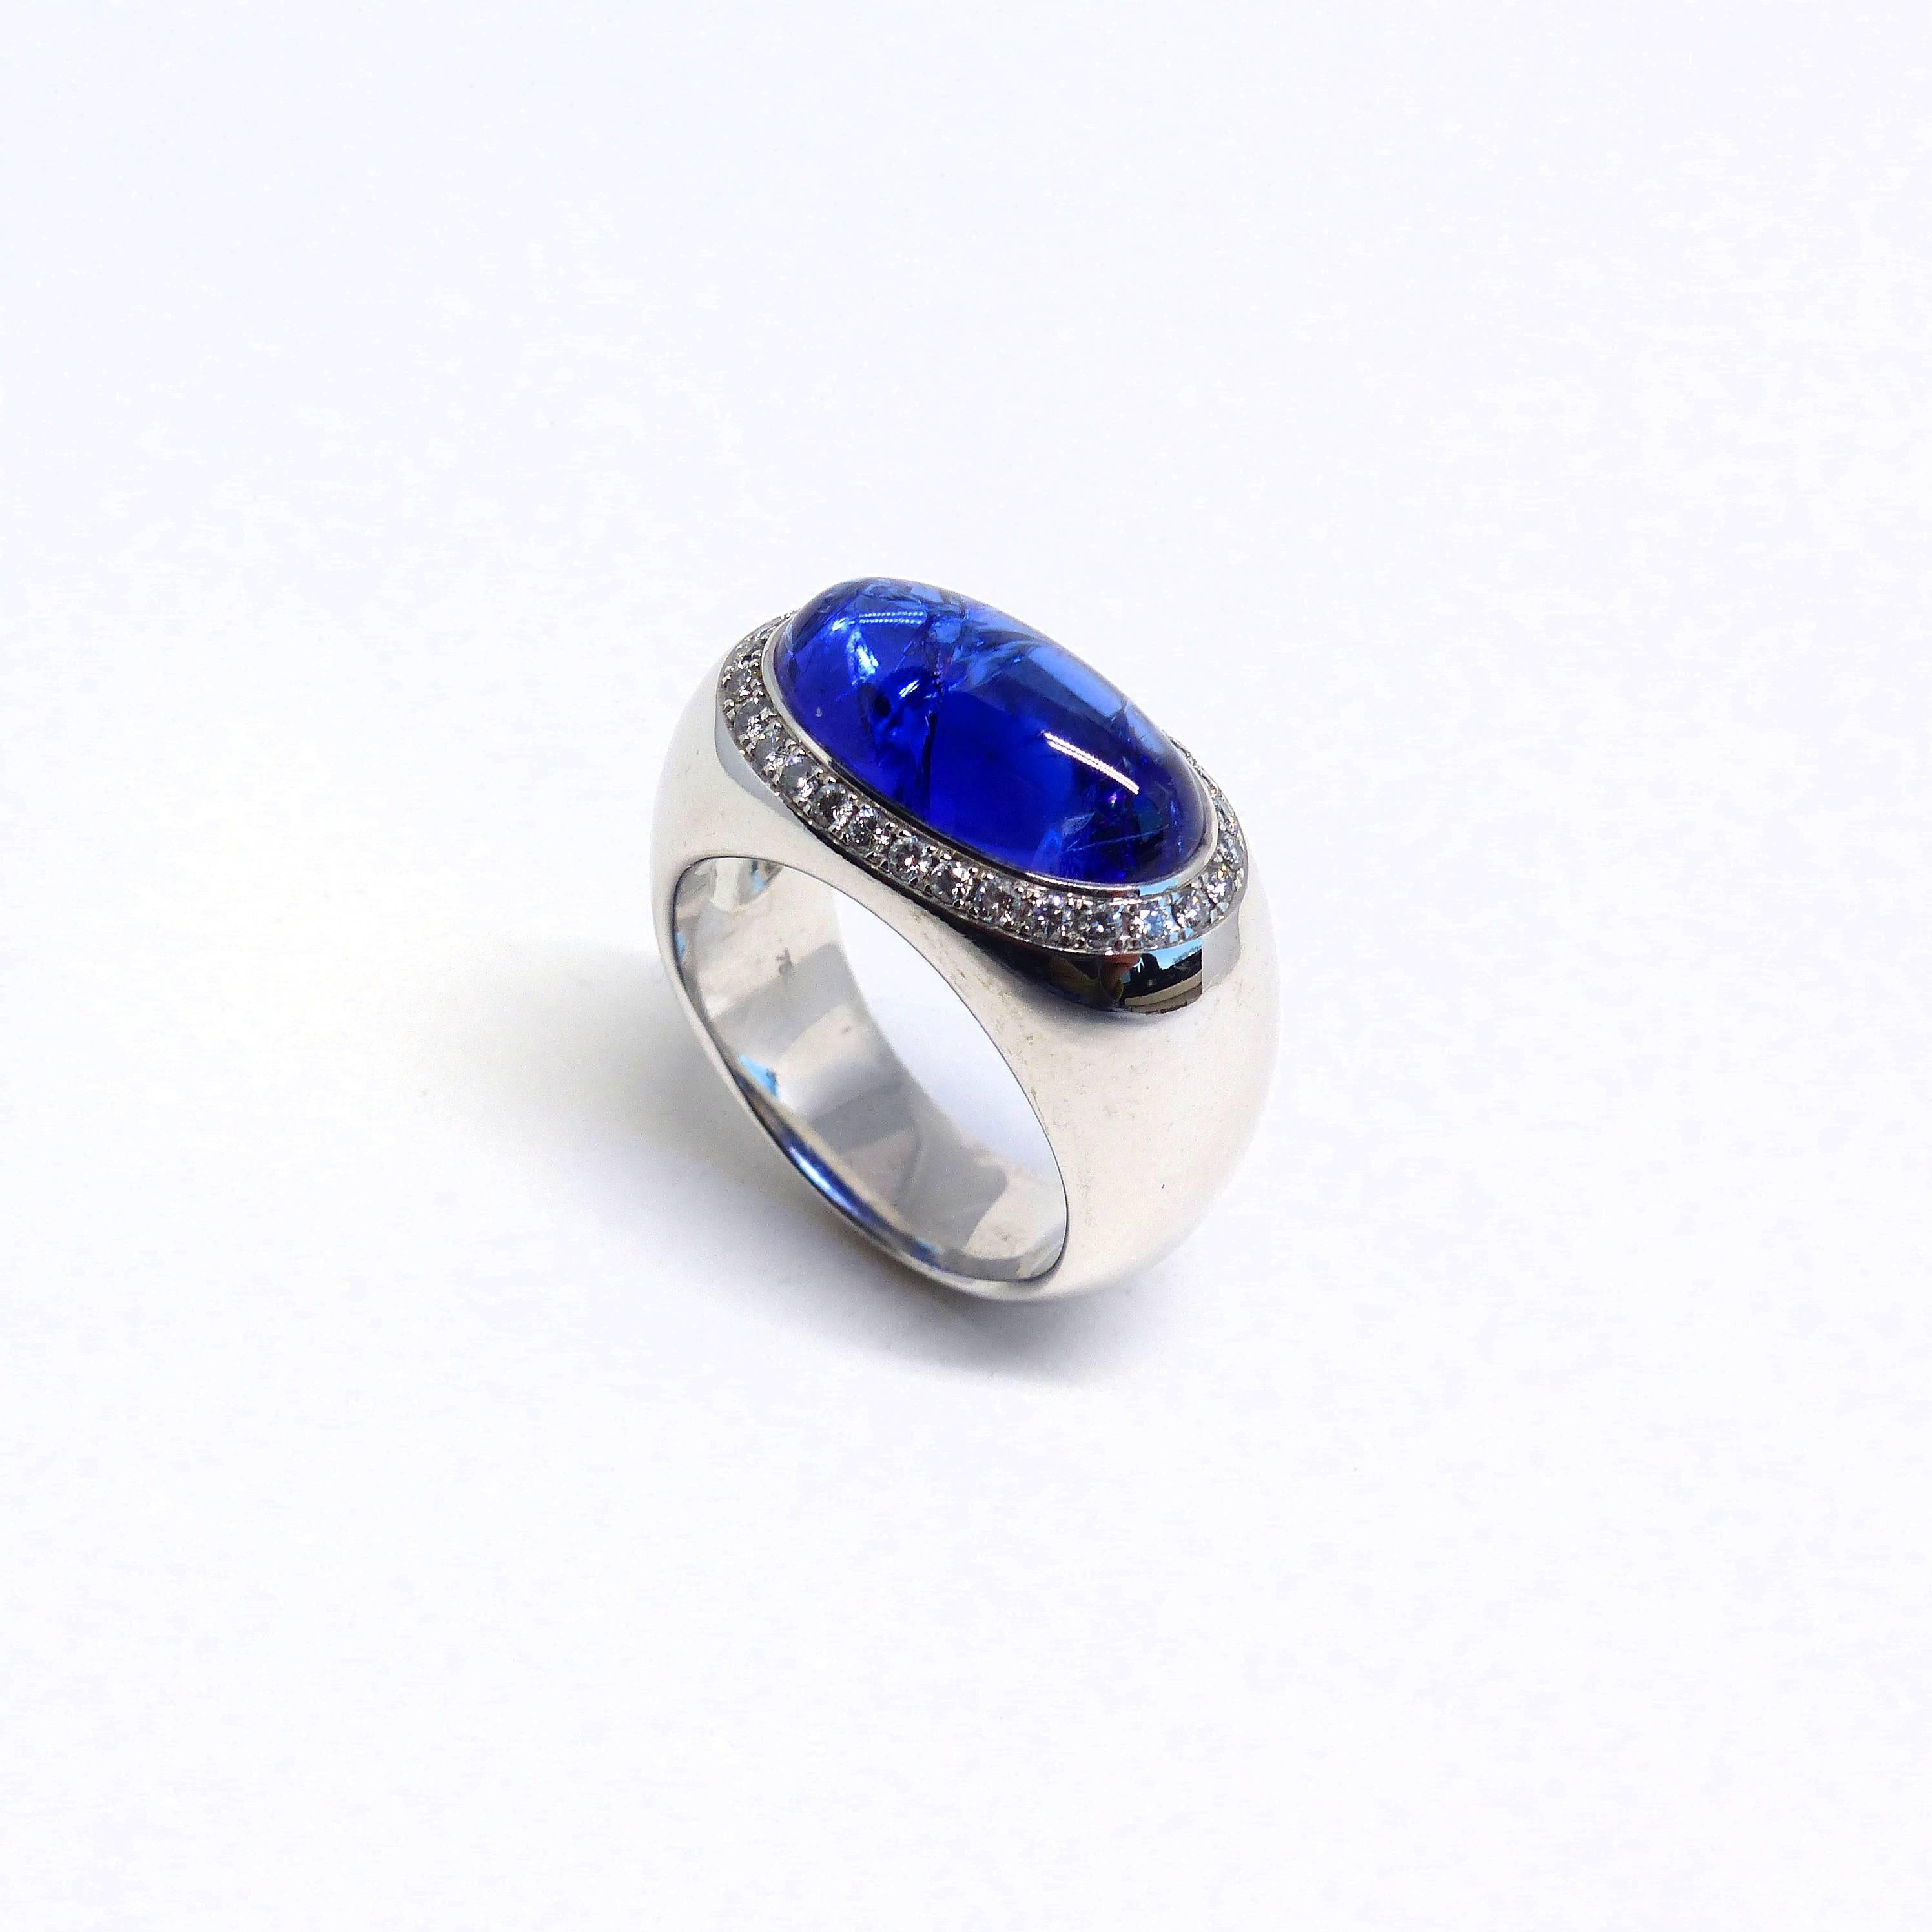 Thomas Leyser is renowned for his contemporary jewellery designs utilizing fine coloured gemstones and diamonds. 

This ring in 18k white gold is set with a top quality Tanzanite Cabouchon (16x9mm, 6.70cts) and Diamonds (brilliant-cut, 1.2mm, G/VS,